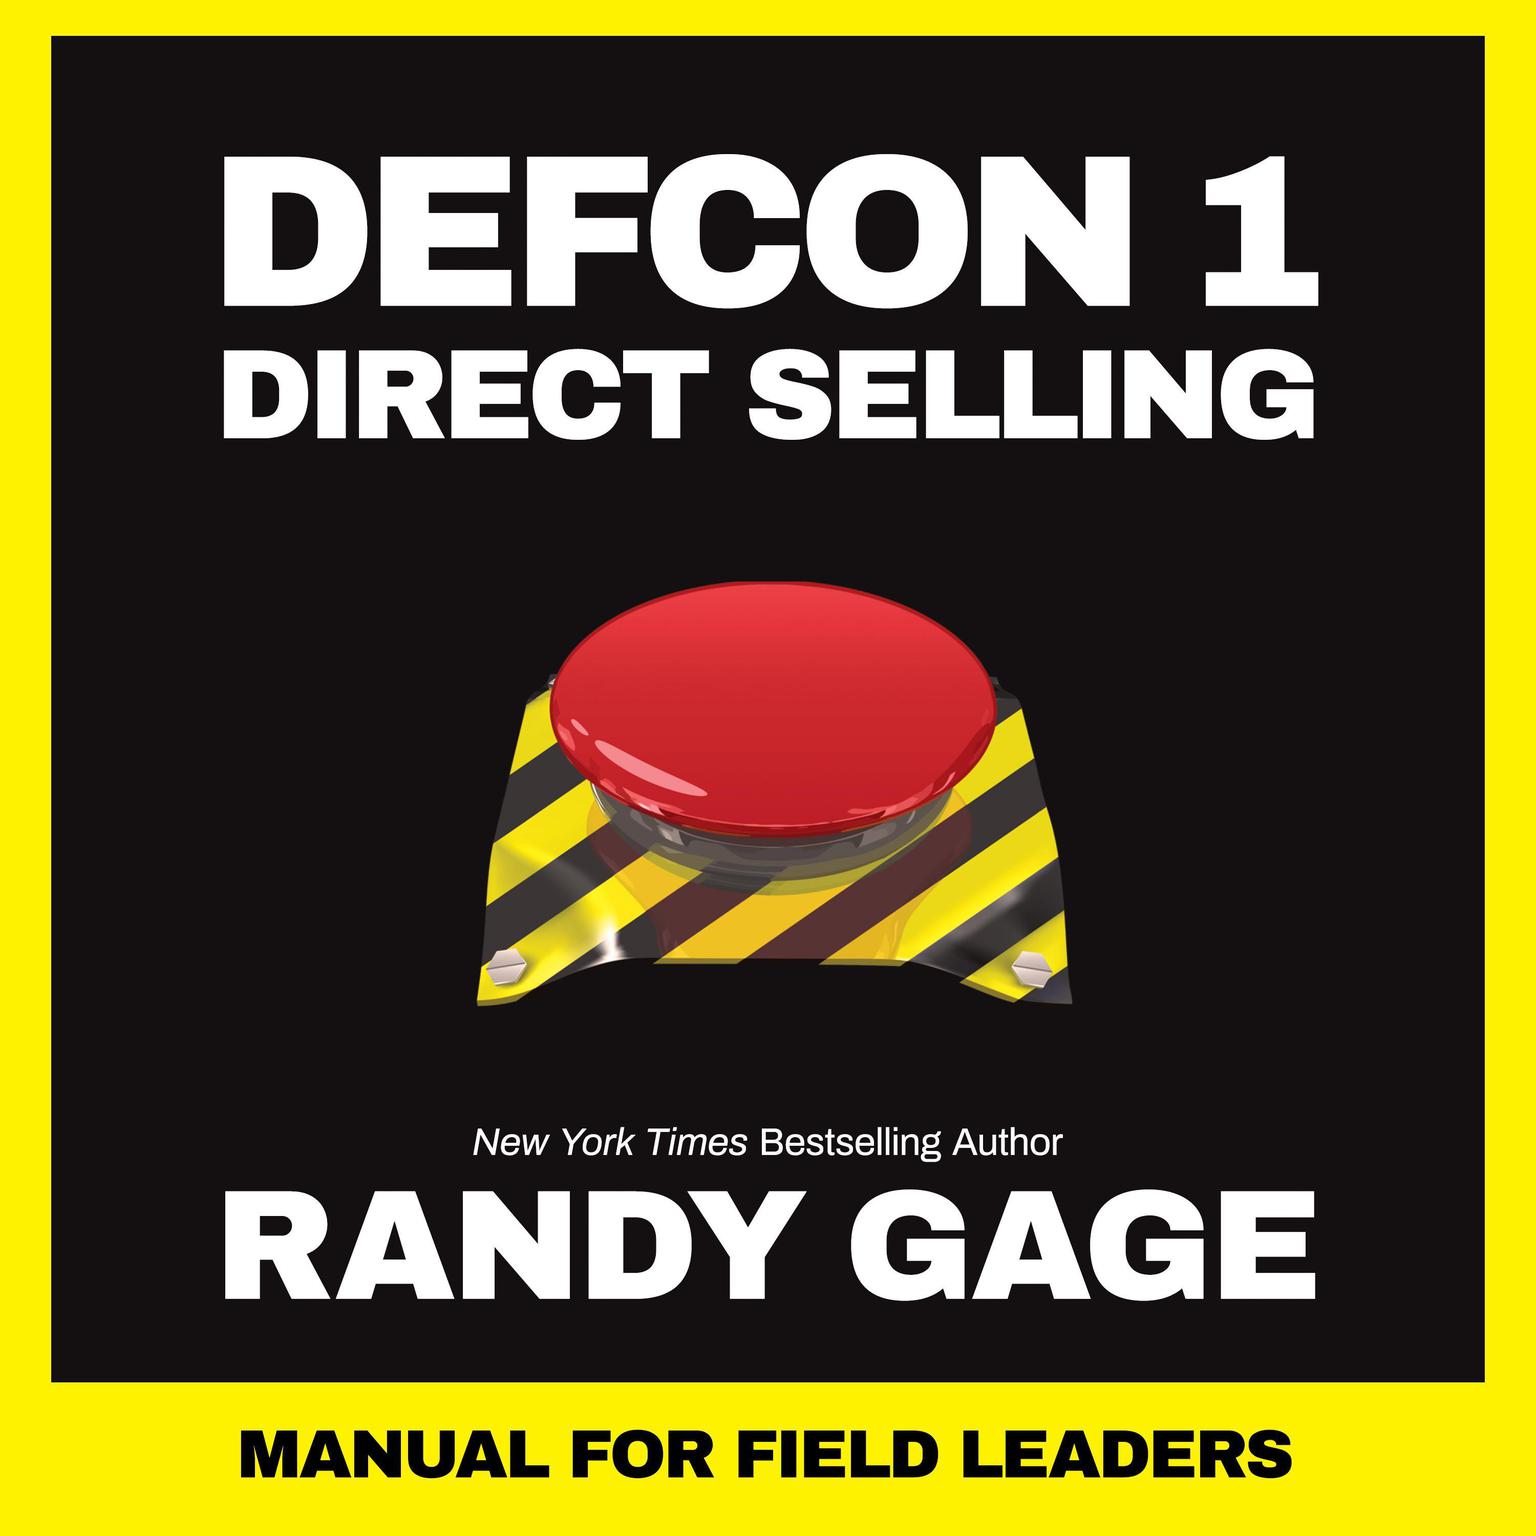 Defcon 1 Direct Selling: Manual for Field Leaders Audiobook, by Randy Gage